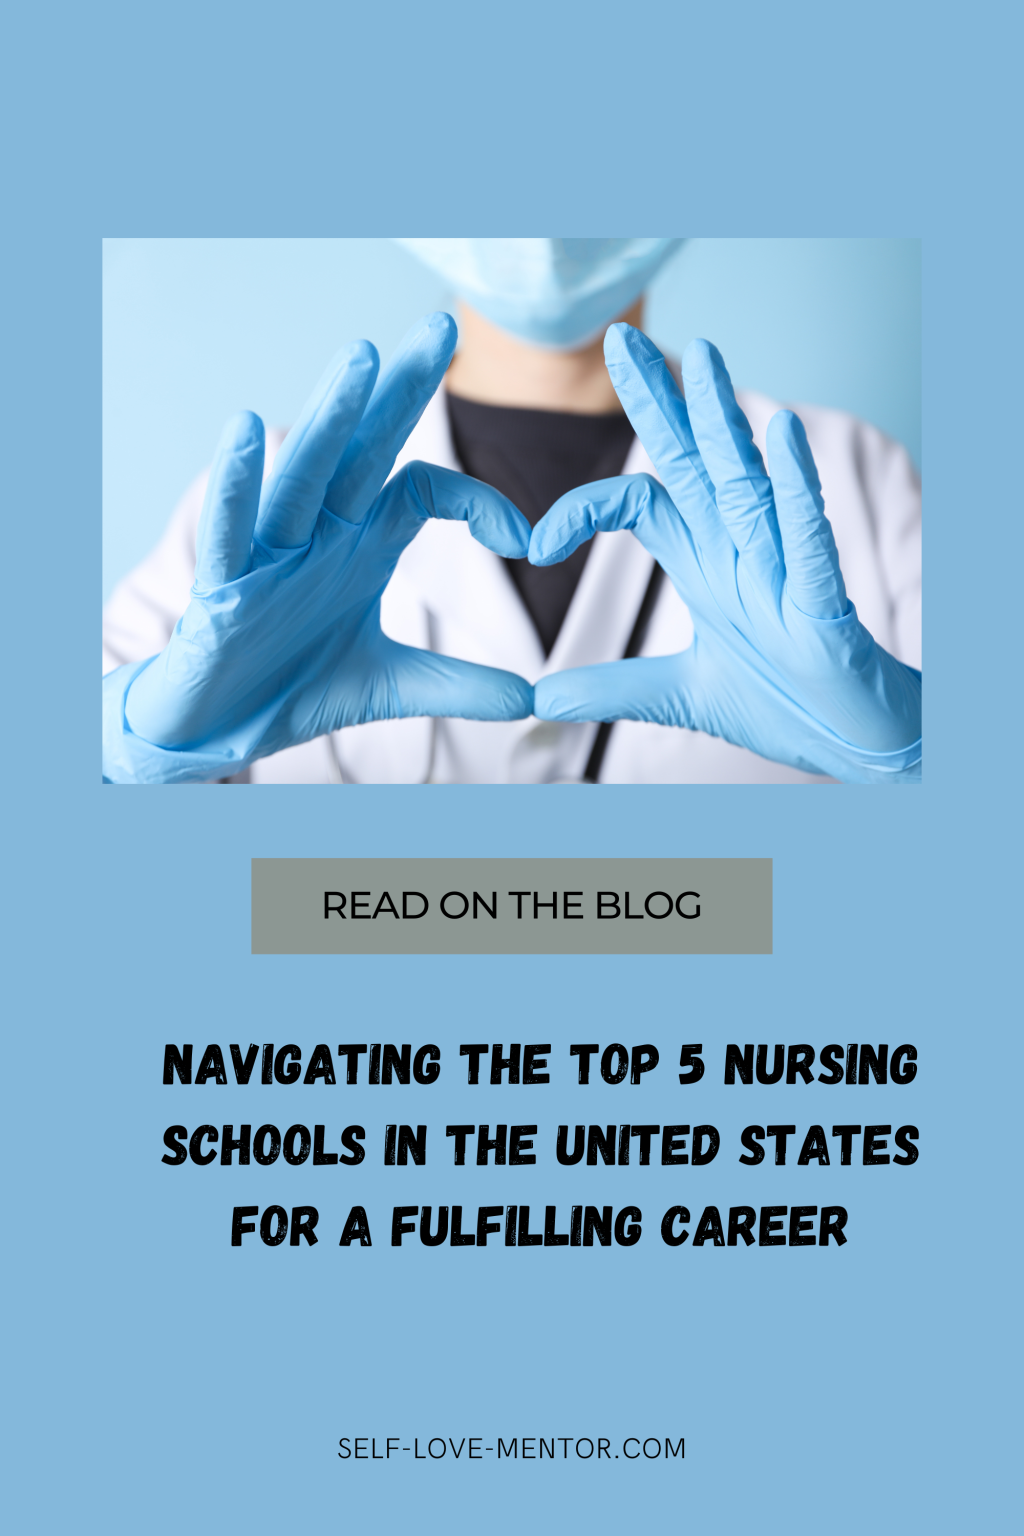 Top 5 Nursing Schools in the United States for a Fulfilling Career